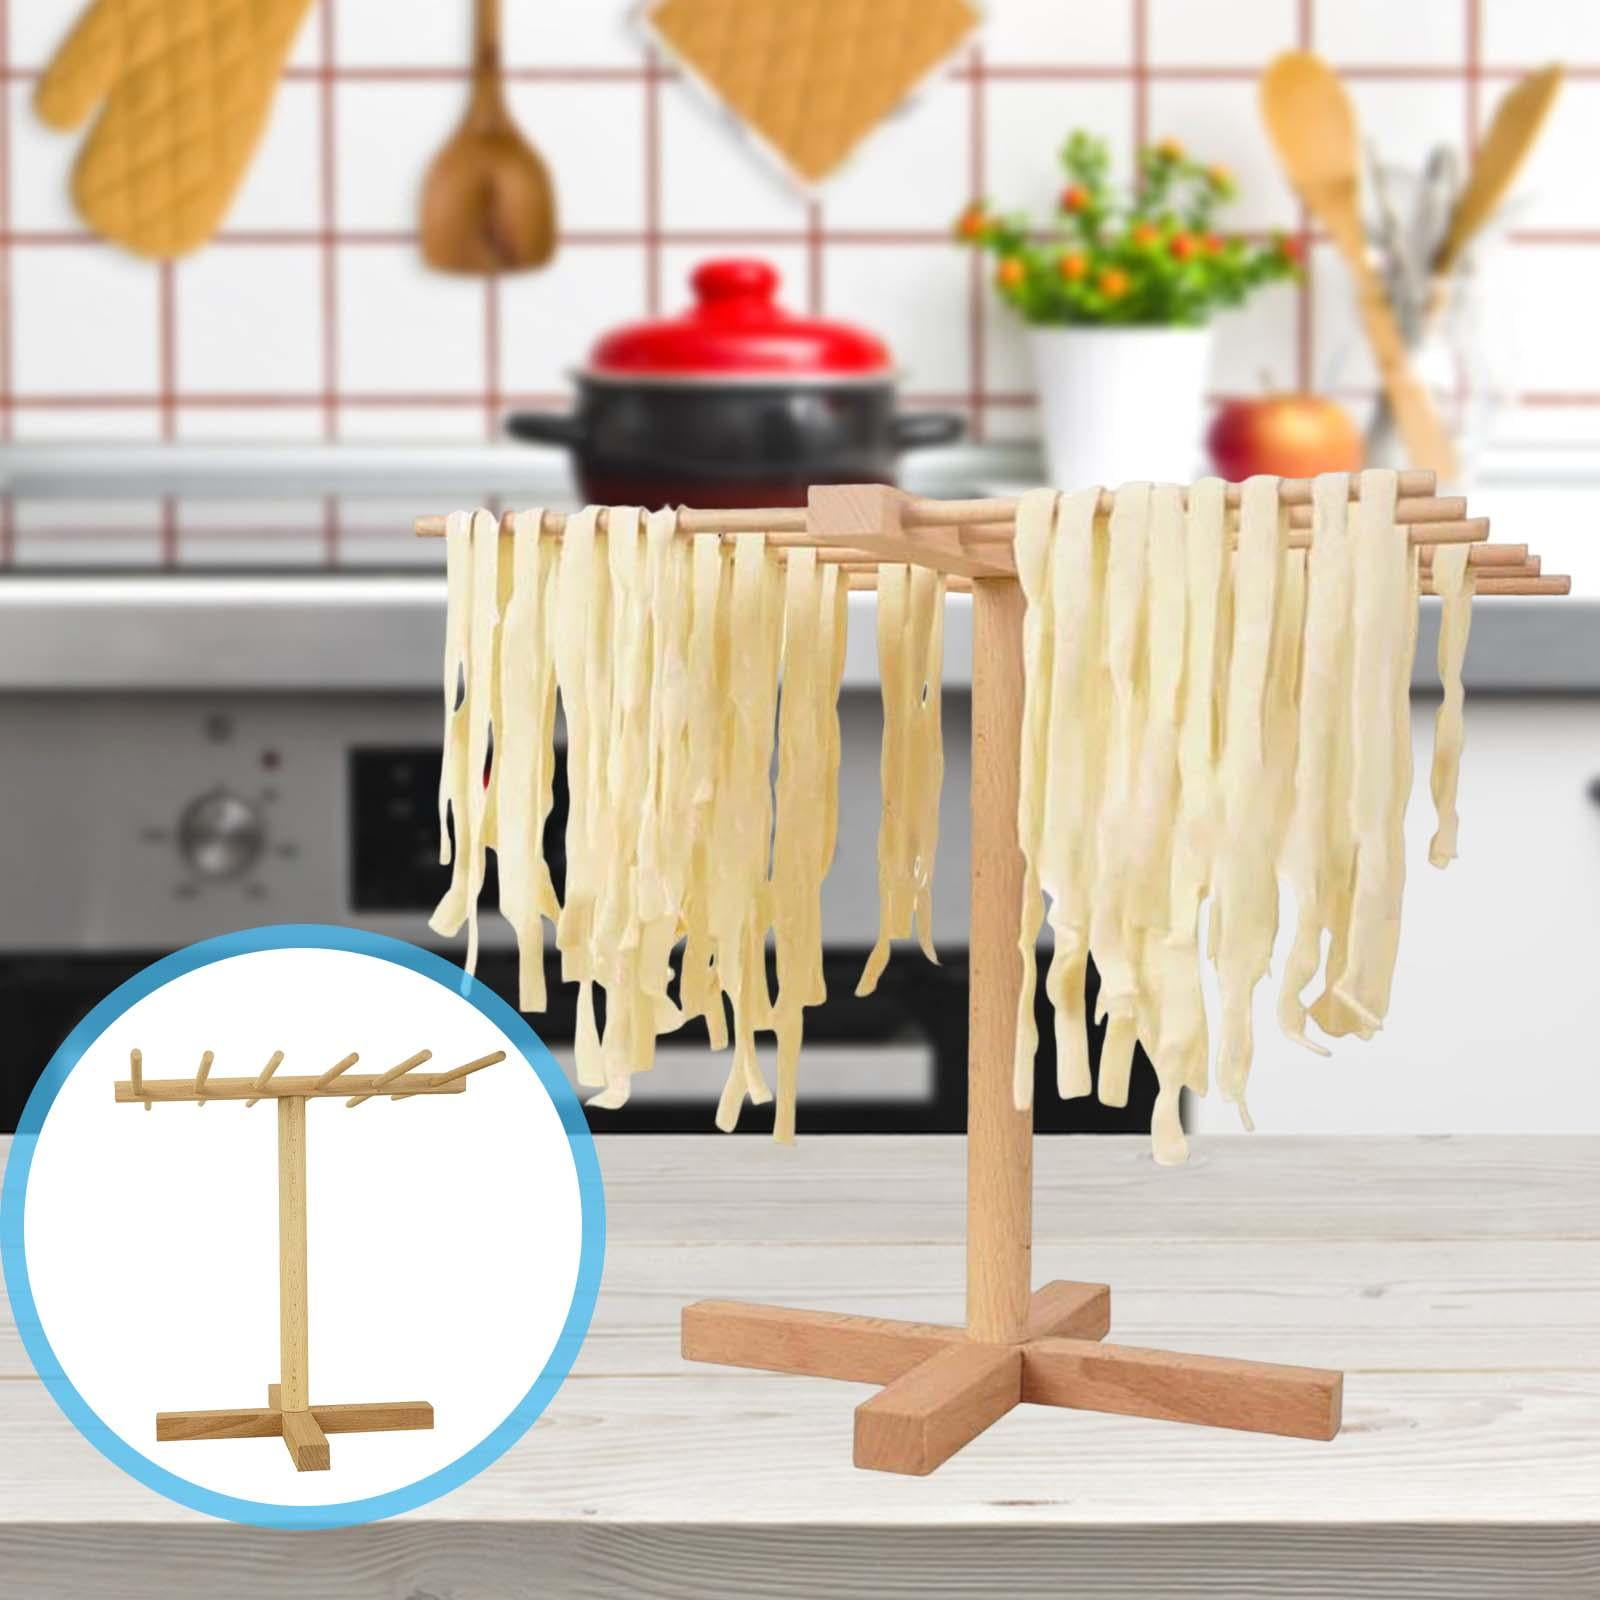 Navaris Collapsible Pasta Drying Rack - Tall Spaghetti Noodle Dryer Stand for Up to 4.5 lbs of Homemade Noodles - Black